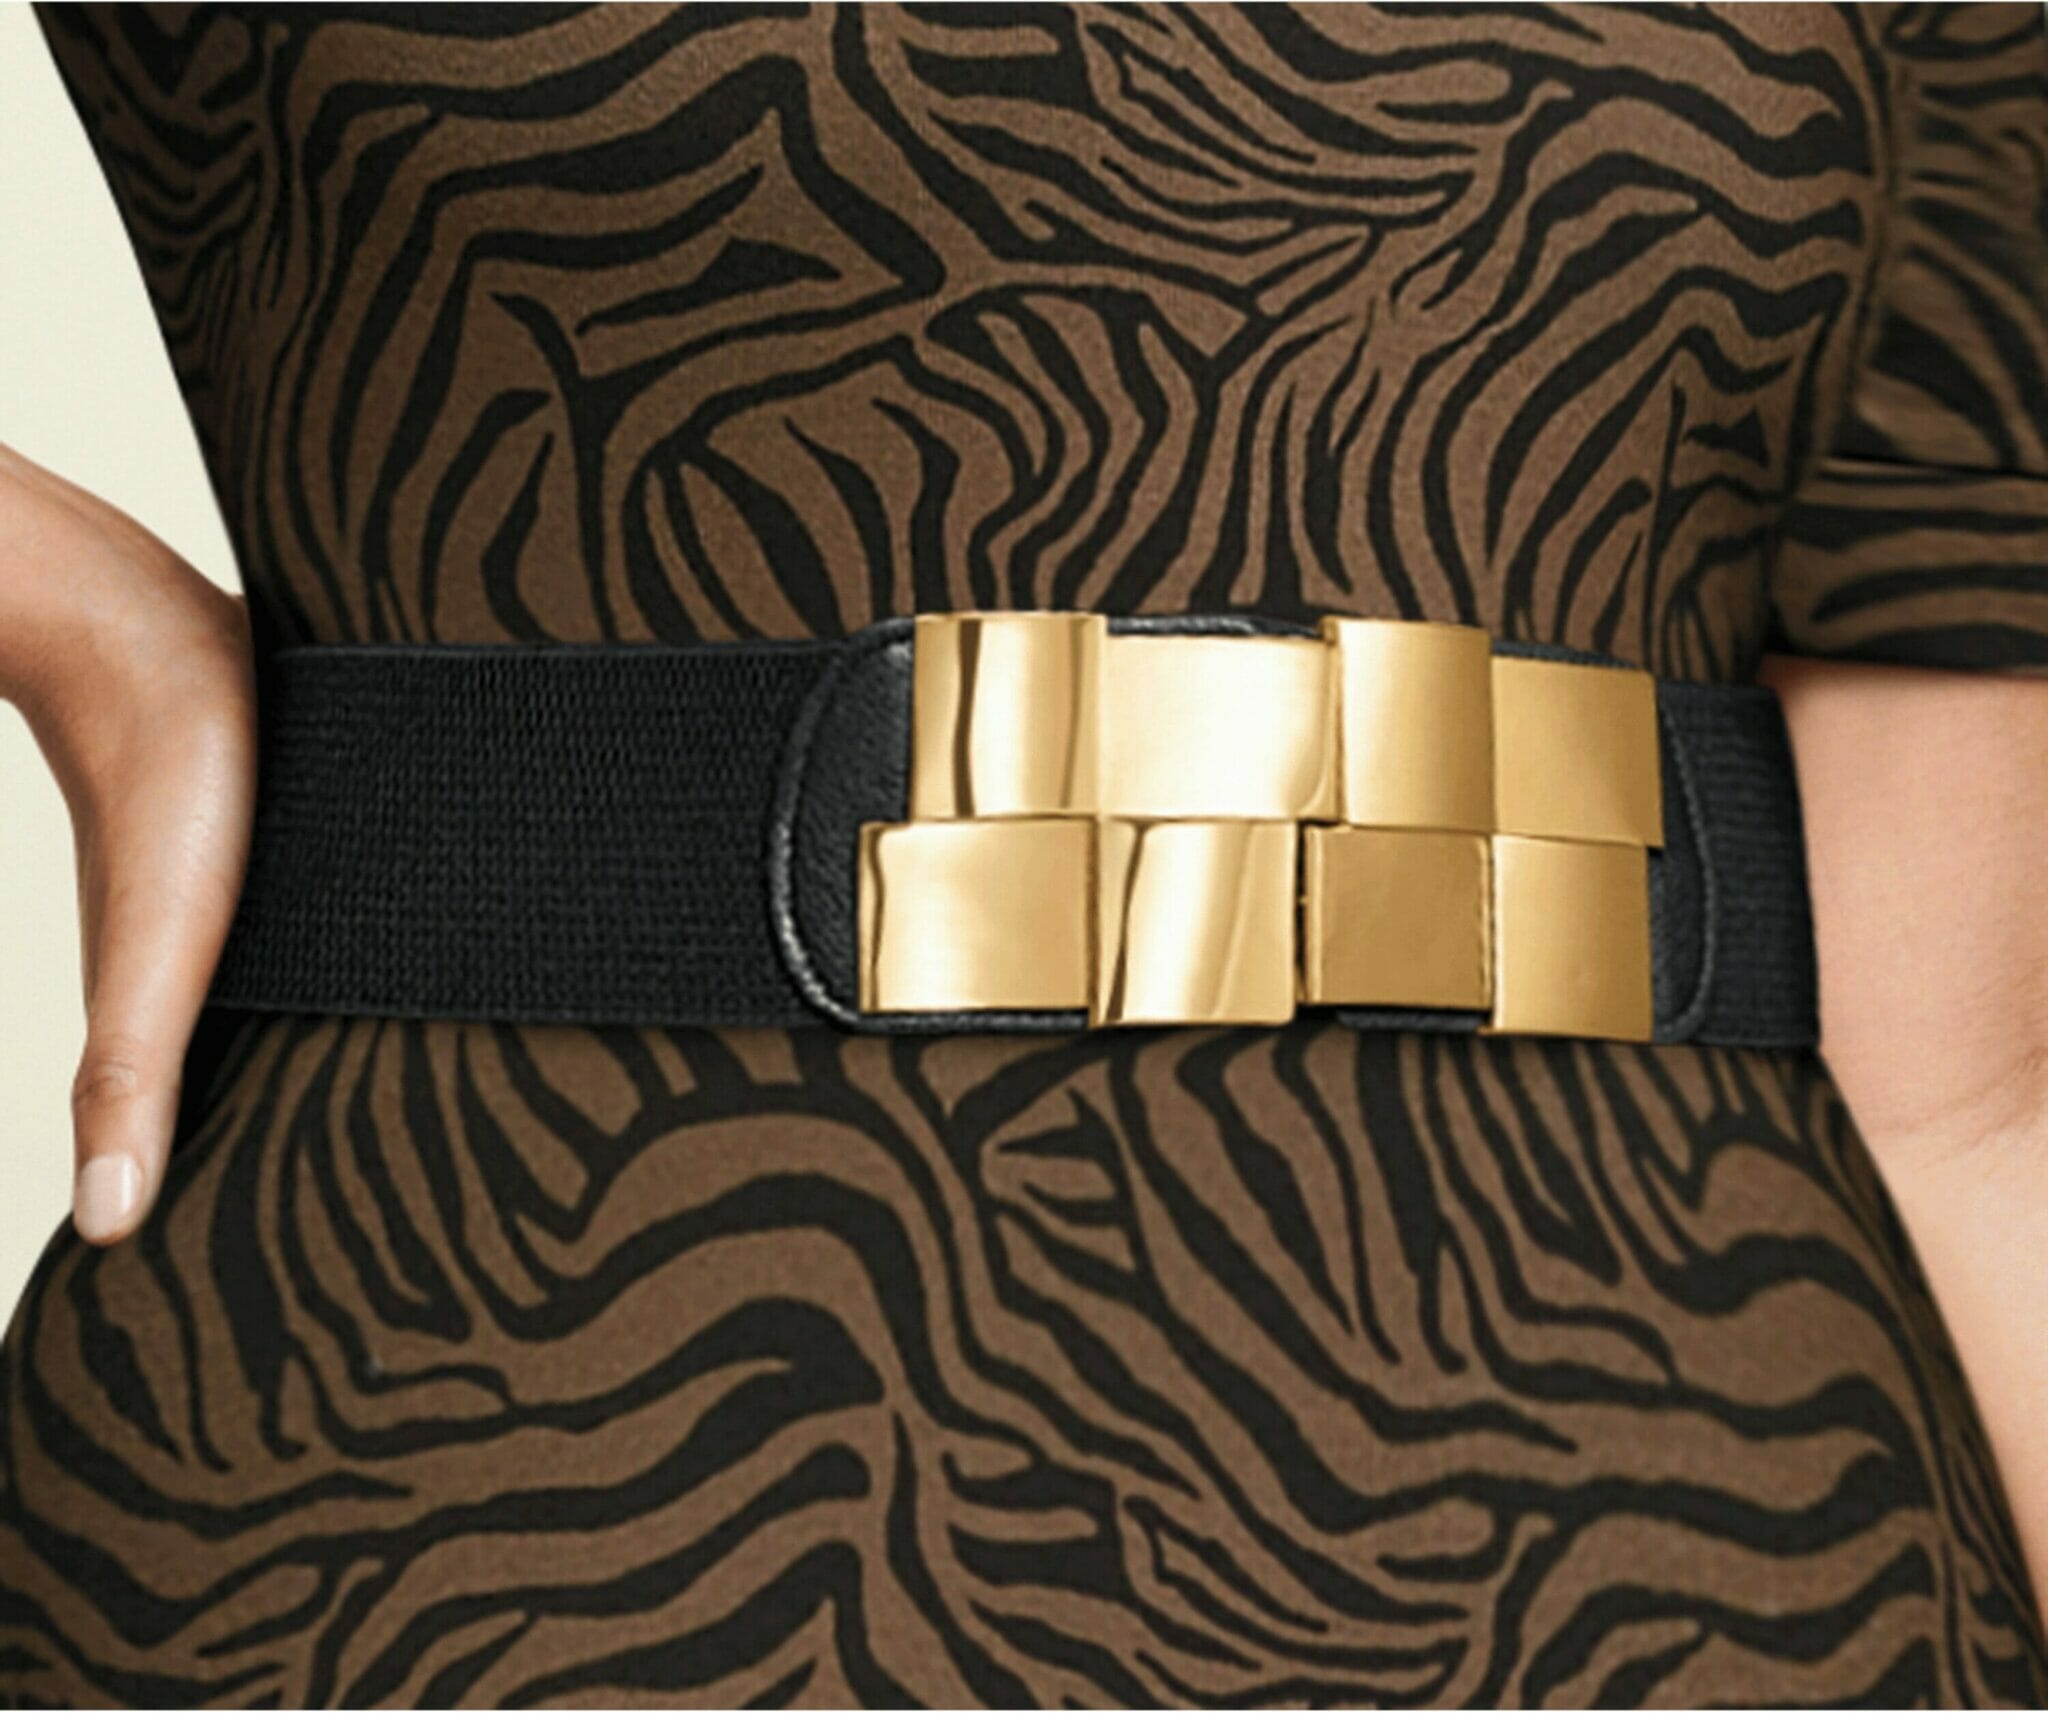 Model wearing brown zebra dress with black belt with gold buckle.